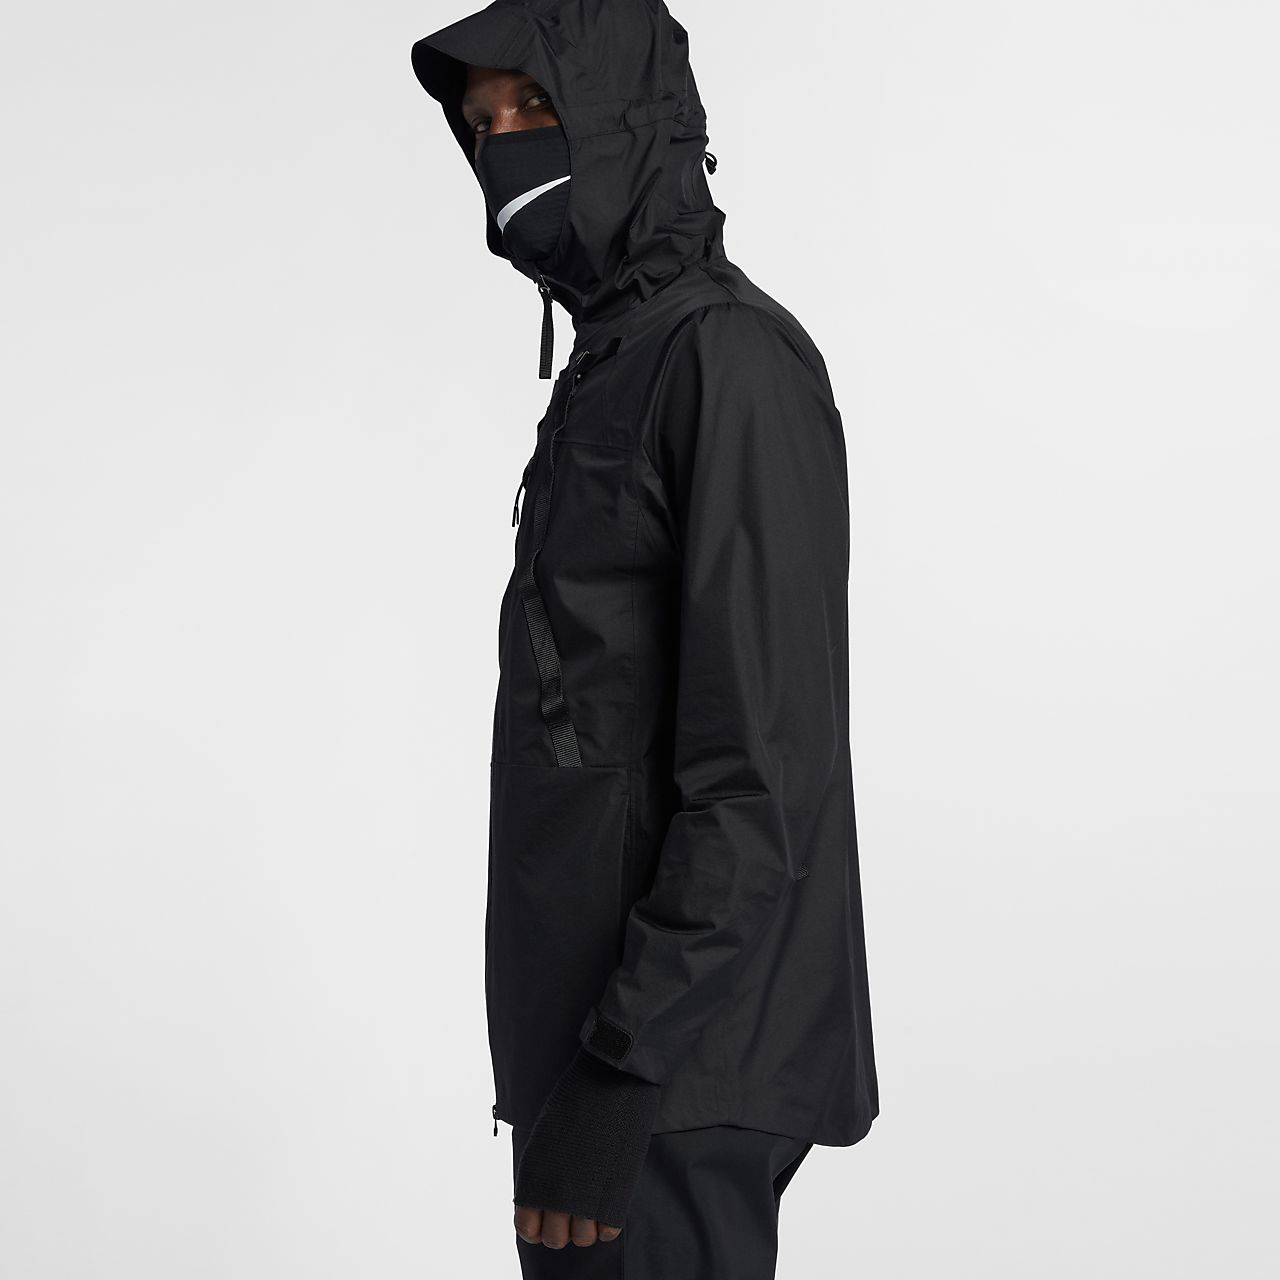 Nike Accused Of Targeting Gang Culture With Their New Balaclava (Ski ...